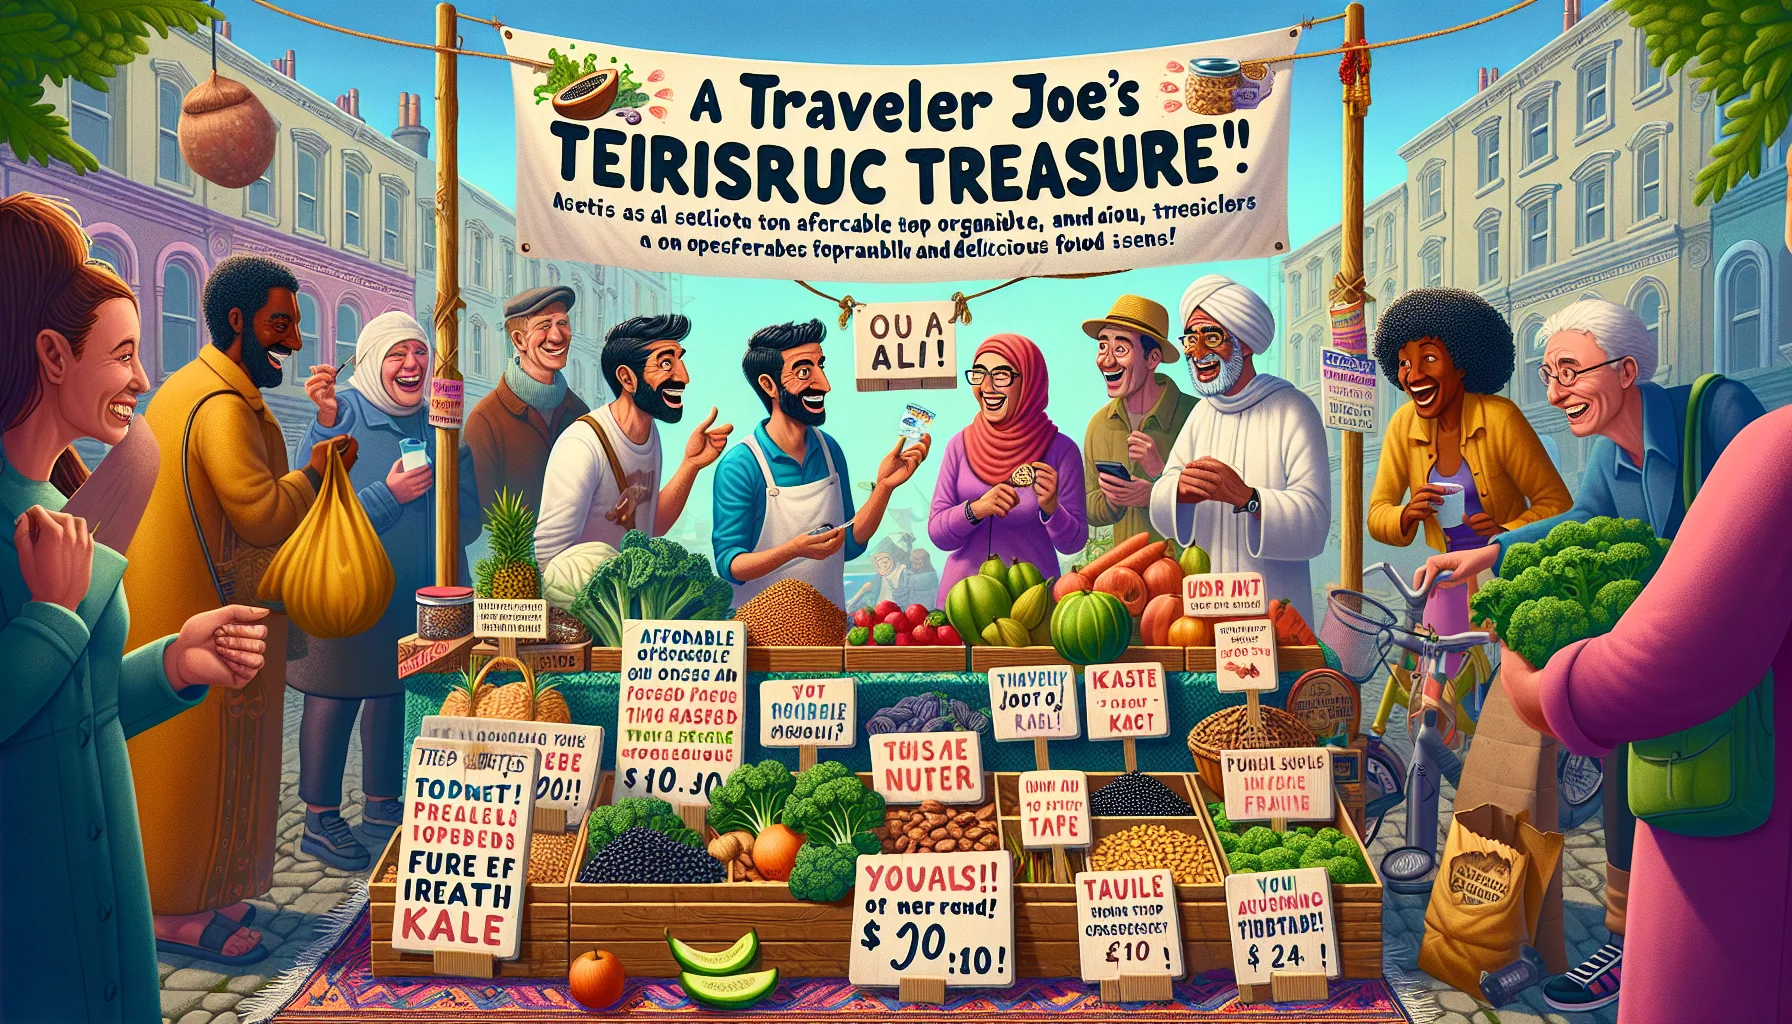 Create a vibrant and engaging scene of a street market stall set up to display a selection of top ten affordable, organic and delicious food items, humorously branded as 'Traveler Joe's Terrific Treasure'. The scene should include signs with witty wordplay and amusing graphics that emphasize the affordability and health benefits of such treasures. Include a diverse array of customers - a Middle-Eastern middle-aged woman examining a pack of organic nuts, a young South-Asian man laughing at a funny sign about kale, a Black elderly couple sharing a bag of fruit and a Caucasian child in awe of a display of colorful vegetables.